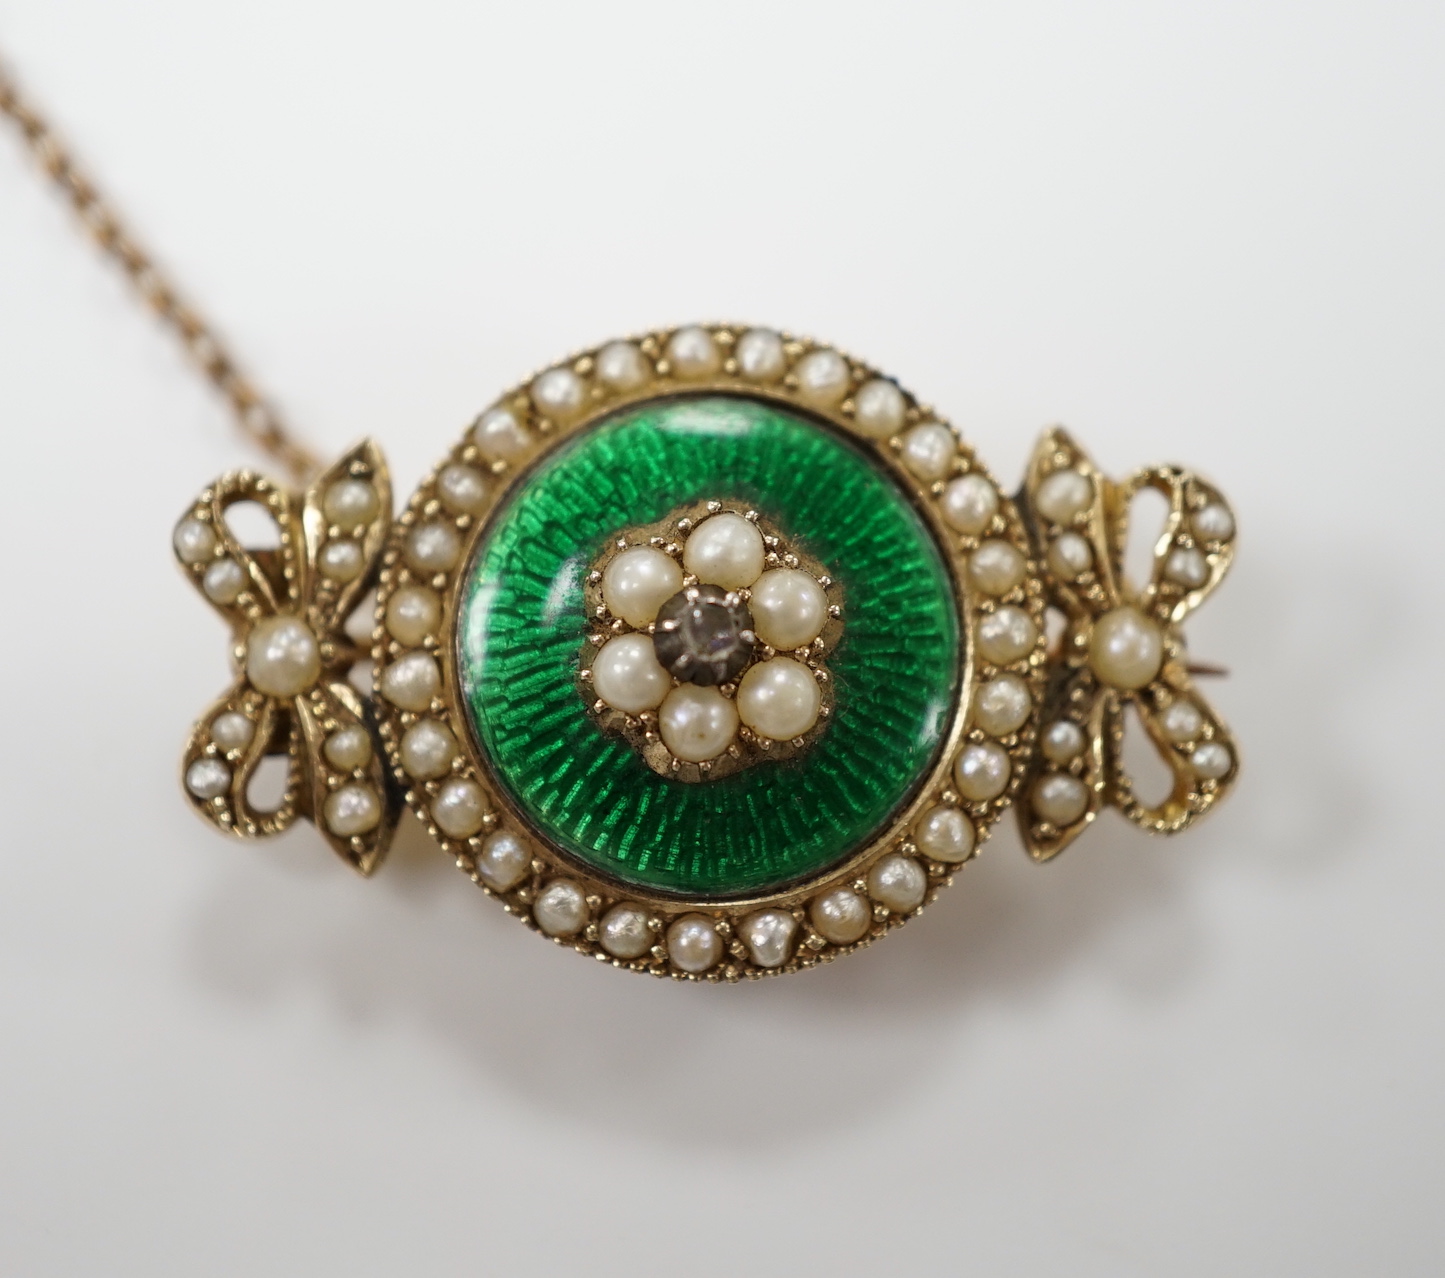 An early 20th century yellow metal, enamel, diamond and seed pearl set brooch, 30mm, gross weight 6.9 grams.